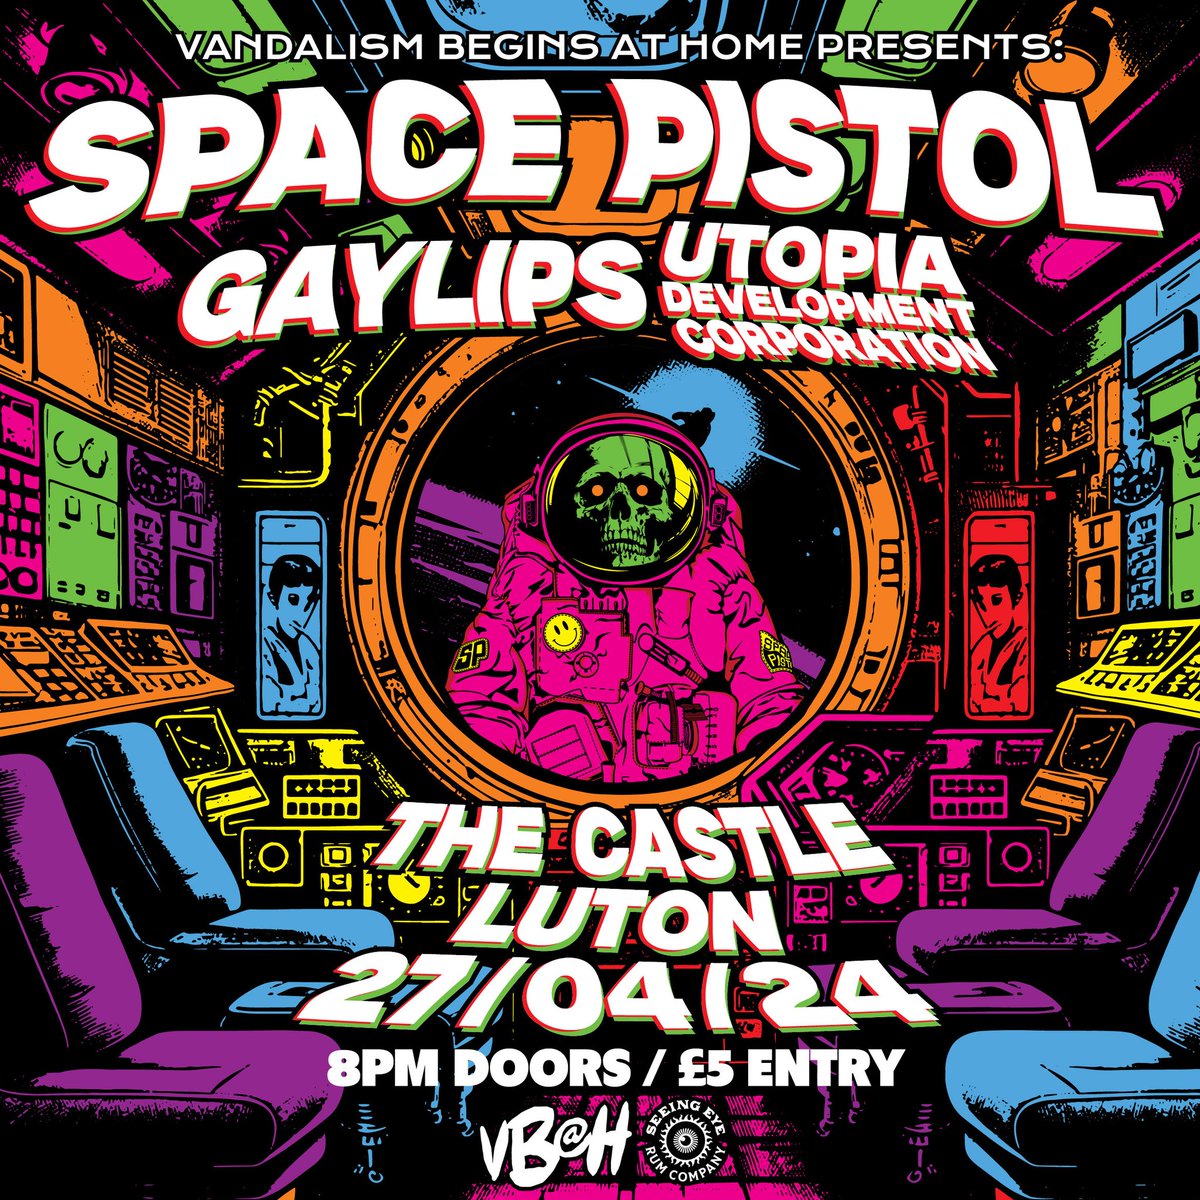 Saturday was supe! Blistering sets by @TheBatteryFarm @pestband666 & Cold Caller. Big thank you to the bands & all that came! We're back on 27/3 with another loud & wild one. @SpacePistolBand & @Gaylips2 return while UDC make their Castle debut. It's gonna be a corker!